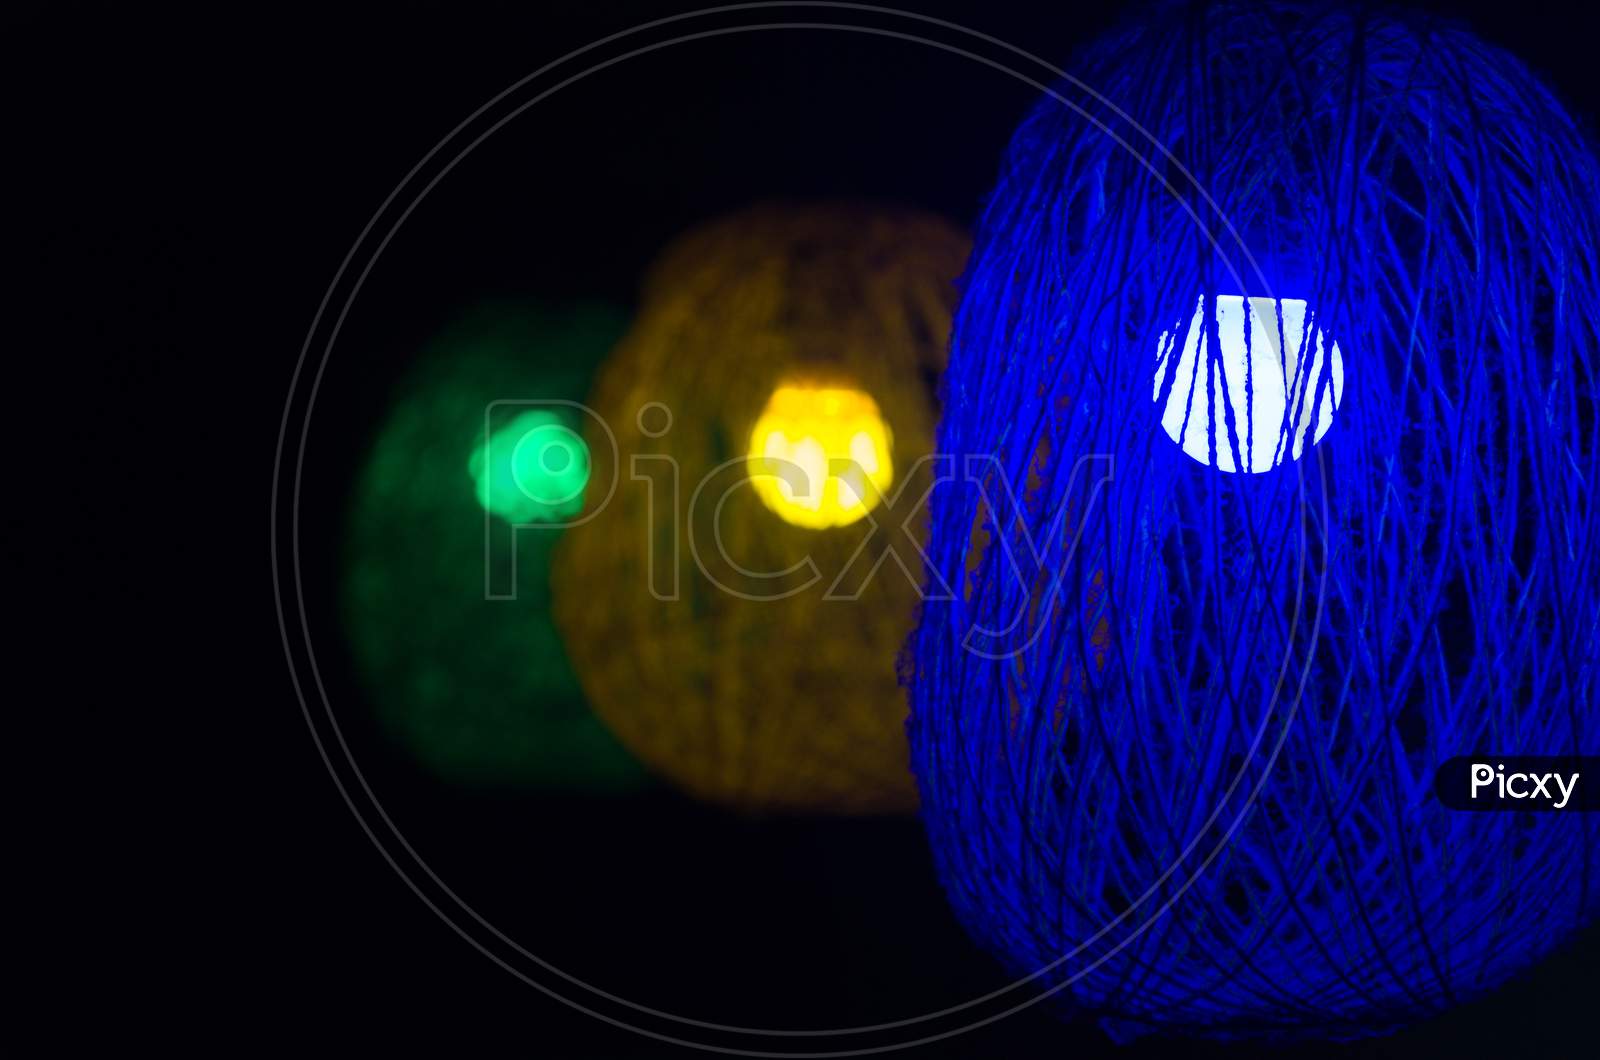 Homemade coloured woolen lamp, selective focus,blurred background.